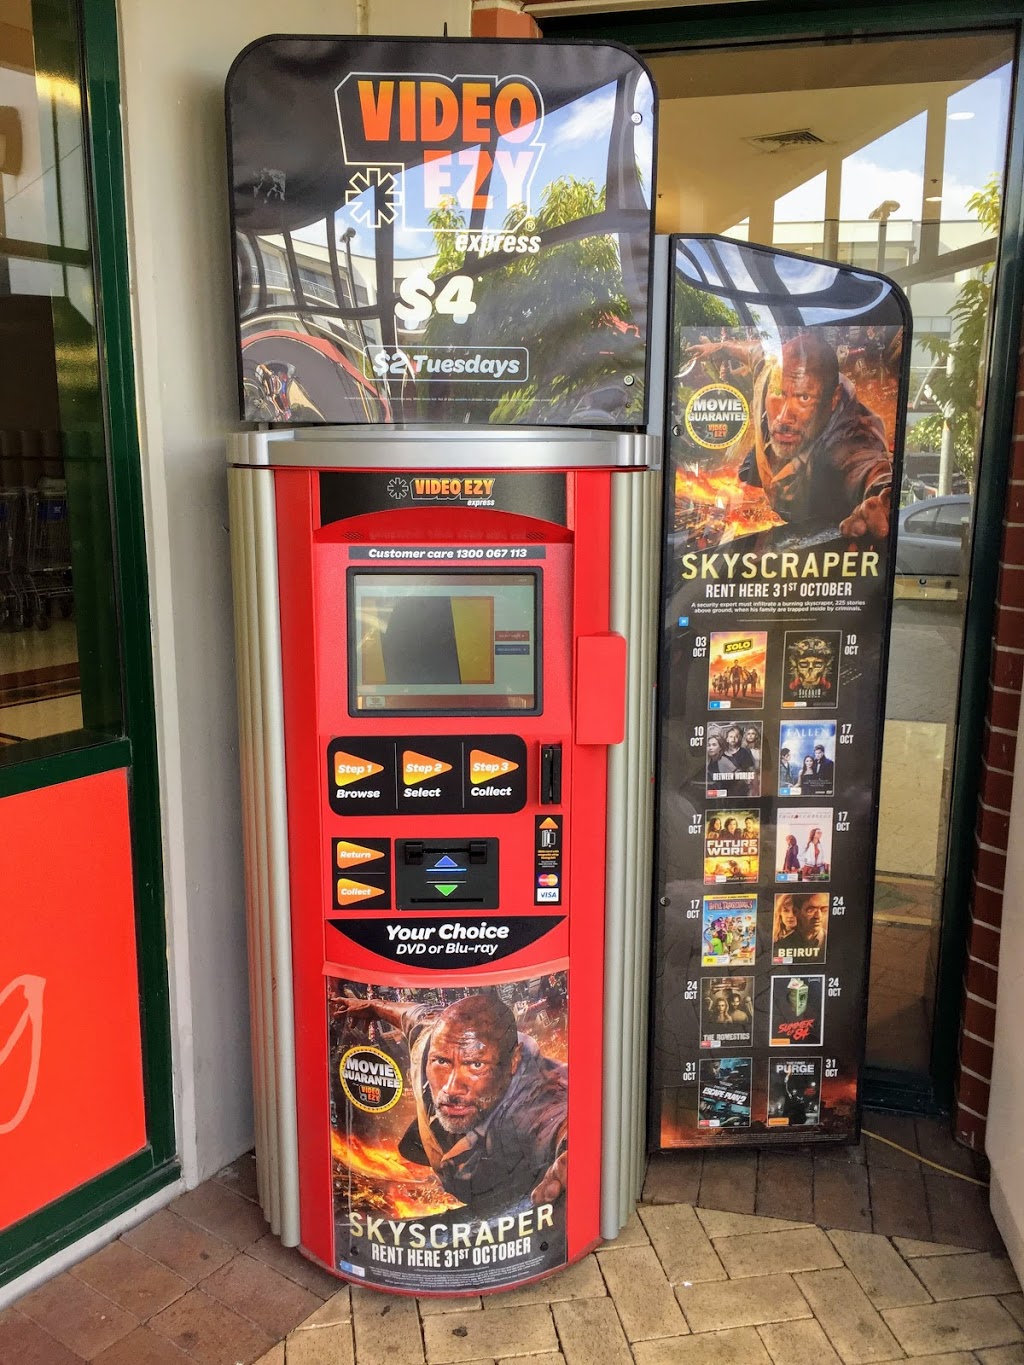 Video Ezy Express - Forest Lake Shopping Centre (South) | movie rental | 235 Forest Lake Blvd, Forest Lake QLD 4078, Australia | 1300067113 OR +61 1300 067 113